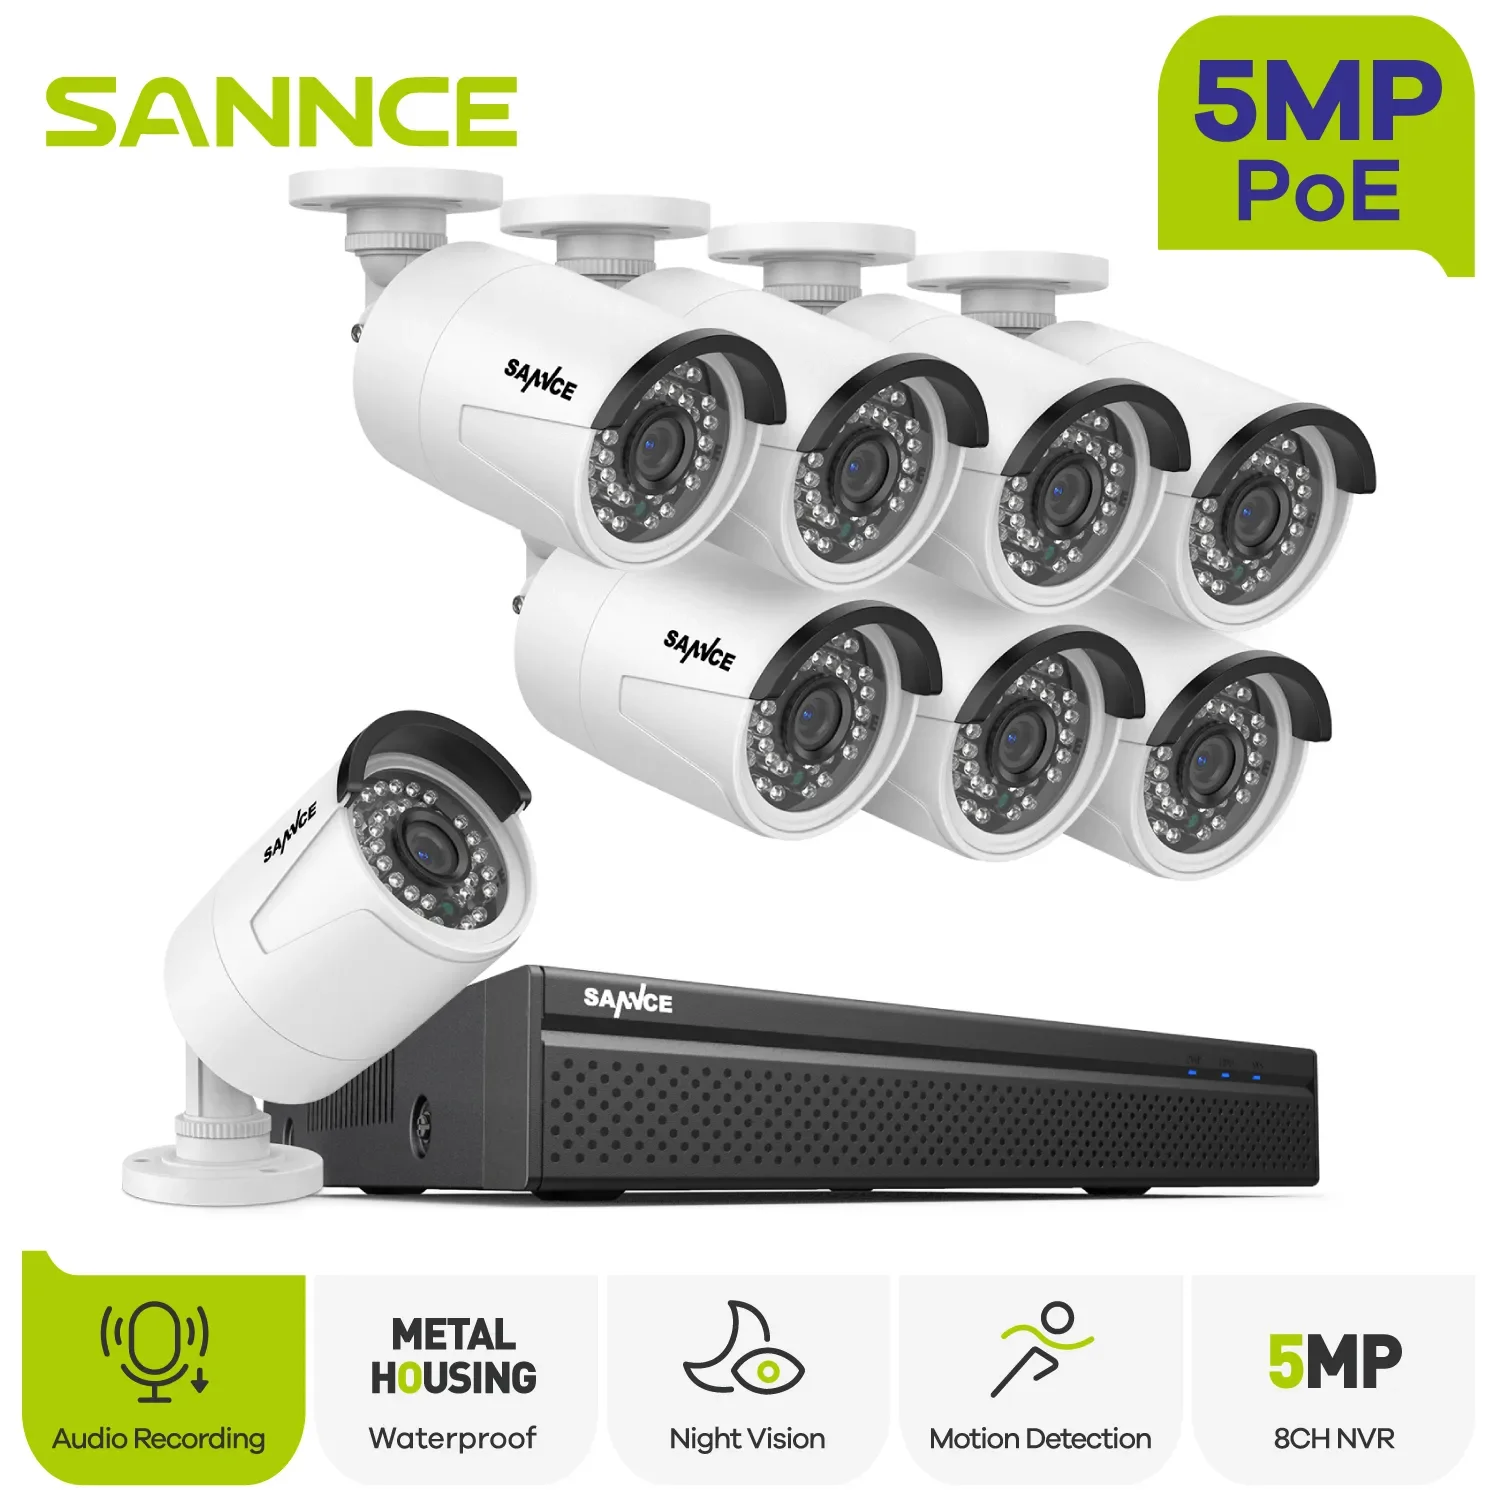 

NEW2023 SANNCE 5MP POE Video Surveillance Cameras System 8CH H.264+ 5MP NVR Recorder 5MP Security Cameras Audio Recording POE IP